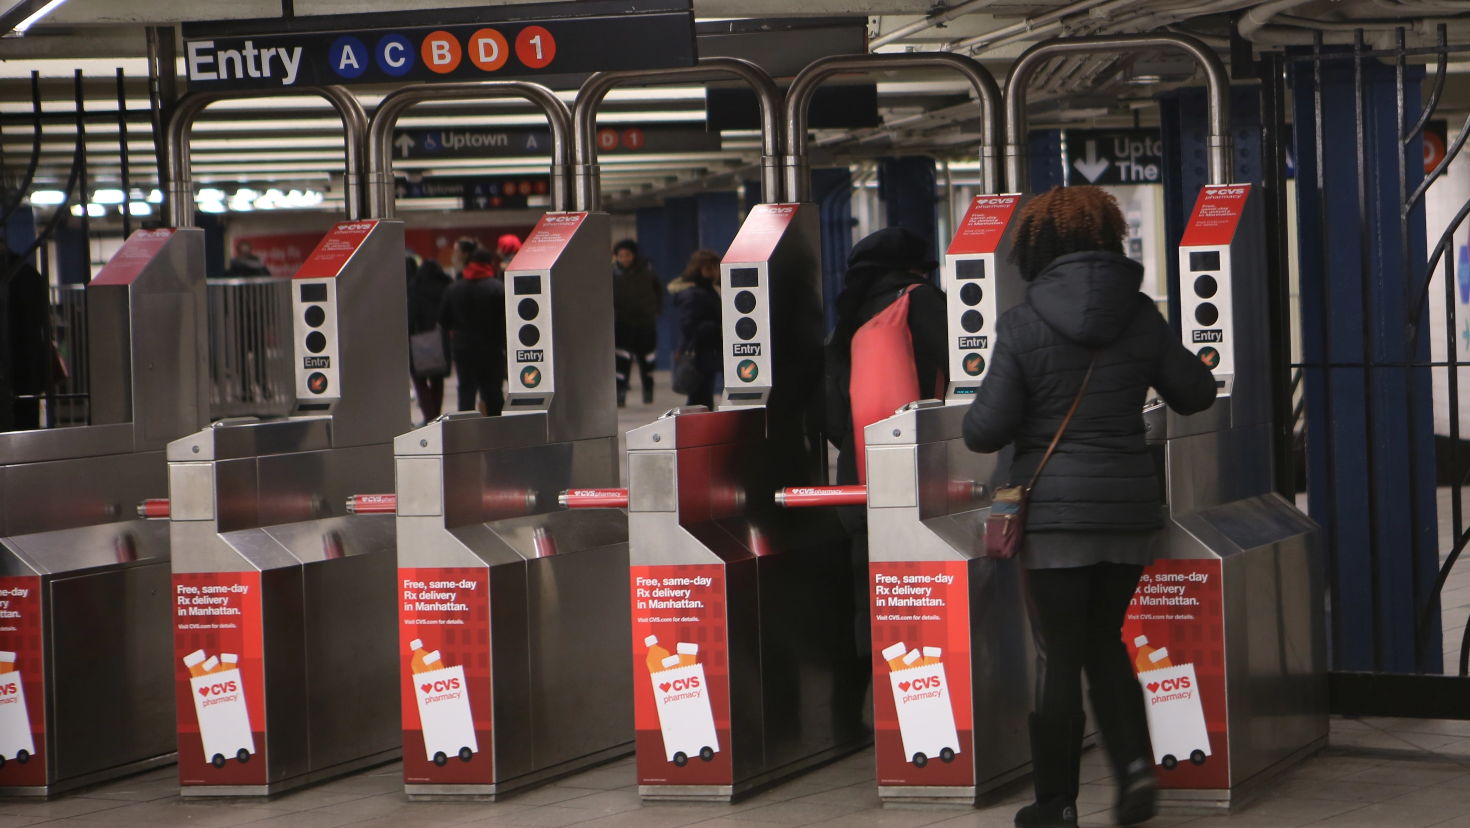 CVS Pharmacy's same-day-delivery information displayed on subway turnstiles. 